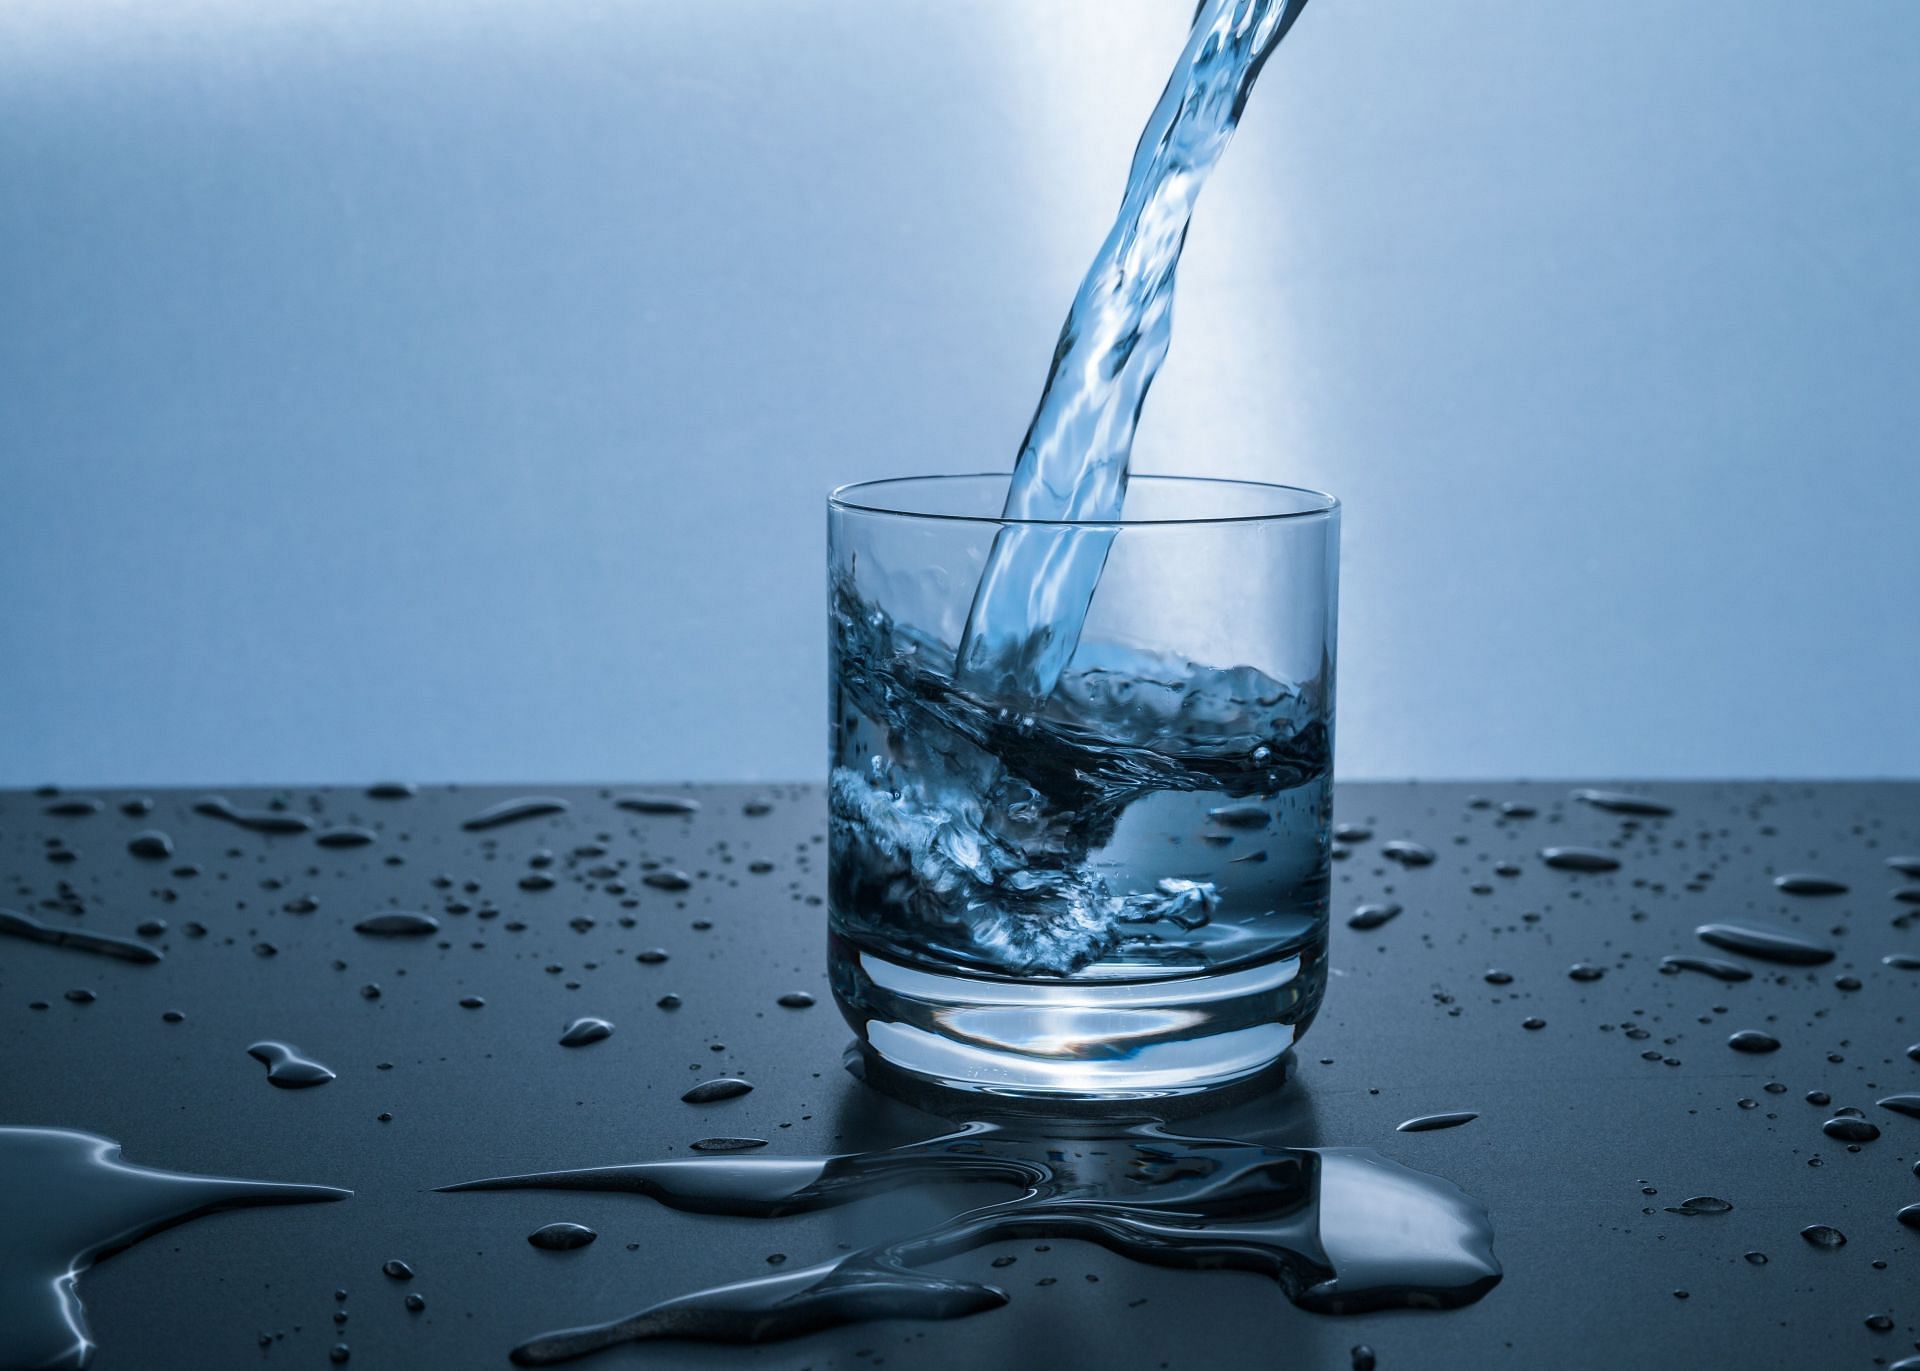 Water for fresh breath (image sourced via Pexels / Photo by Pixabay)